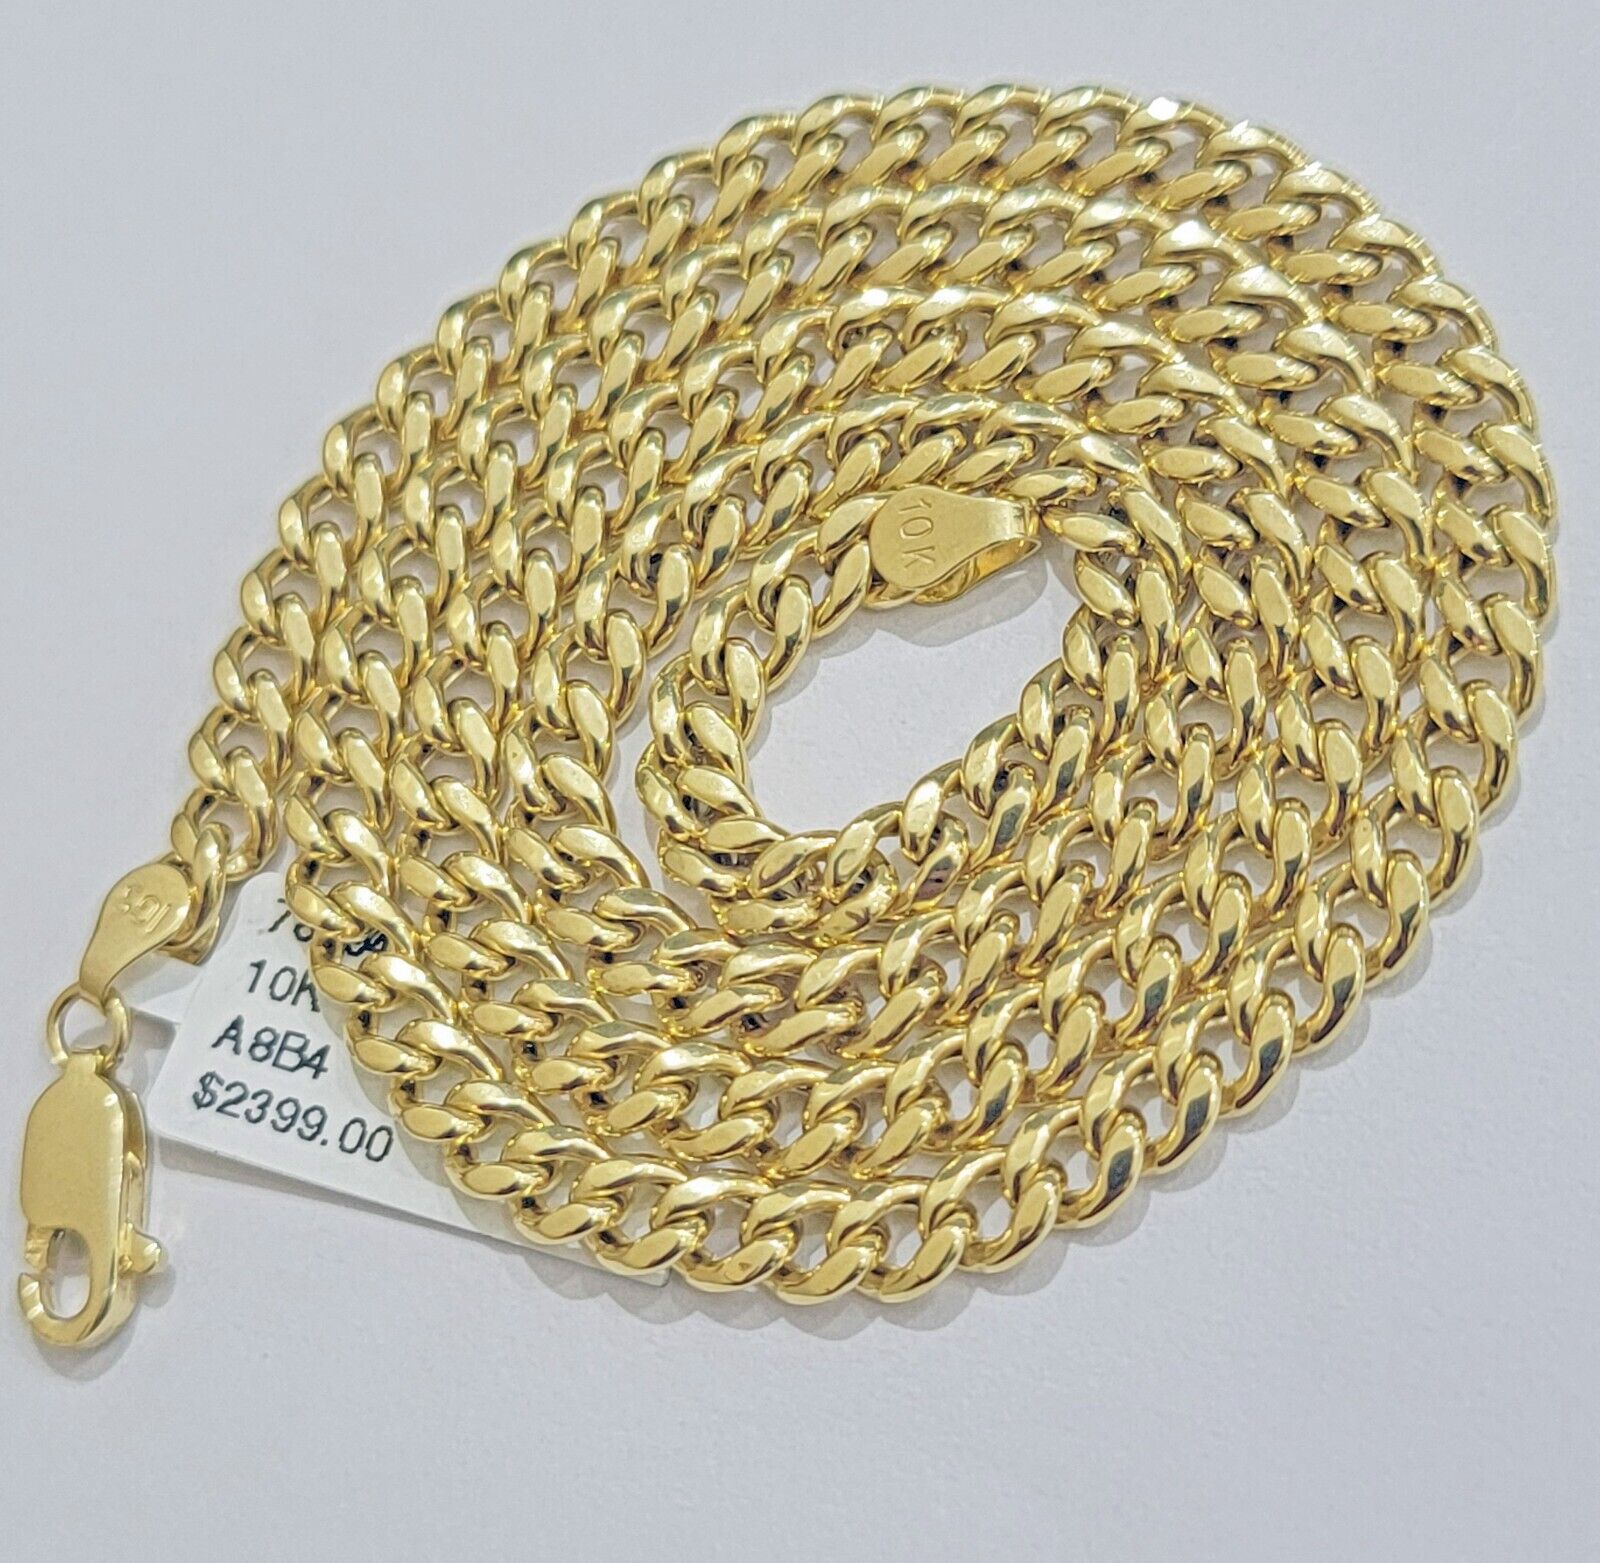 REAL 10k Yellow Gold Cuban link Chain Nugget Charm Pendant Necklace 5mm 24